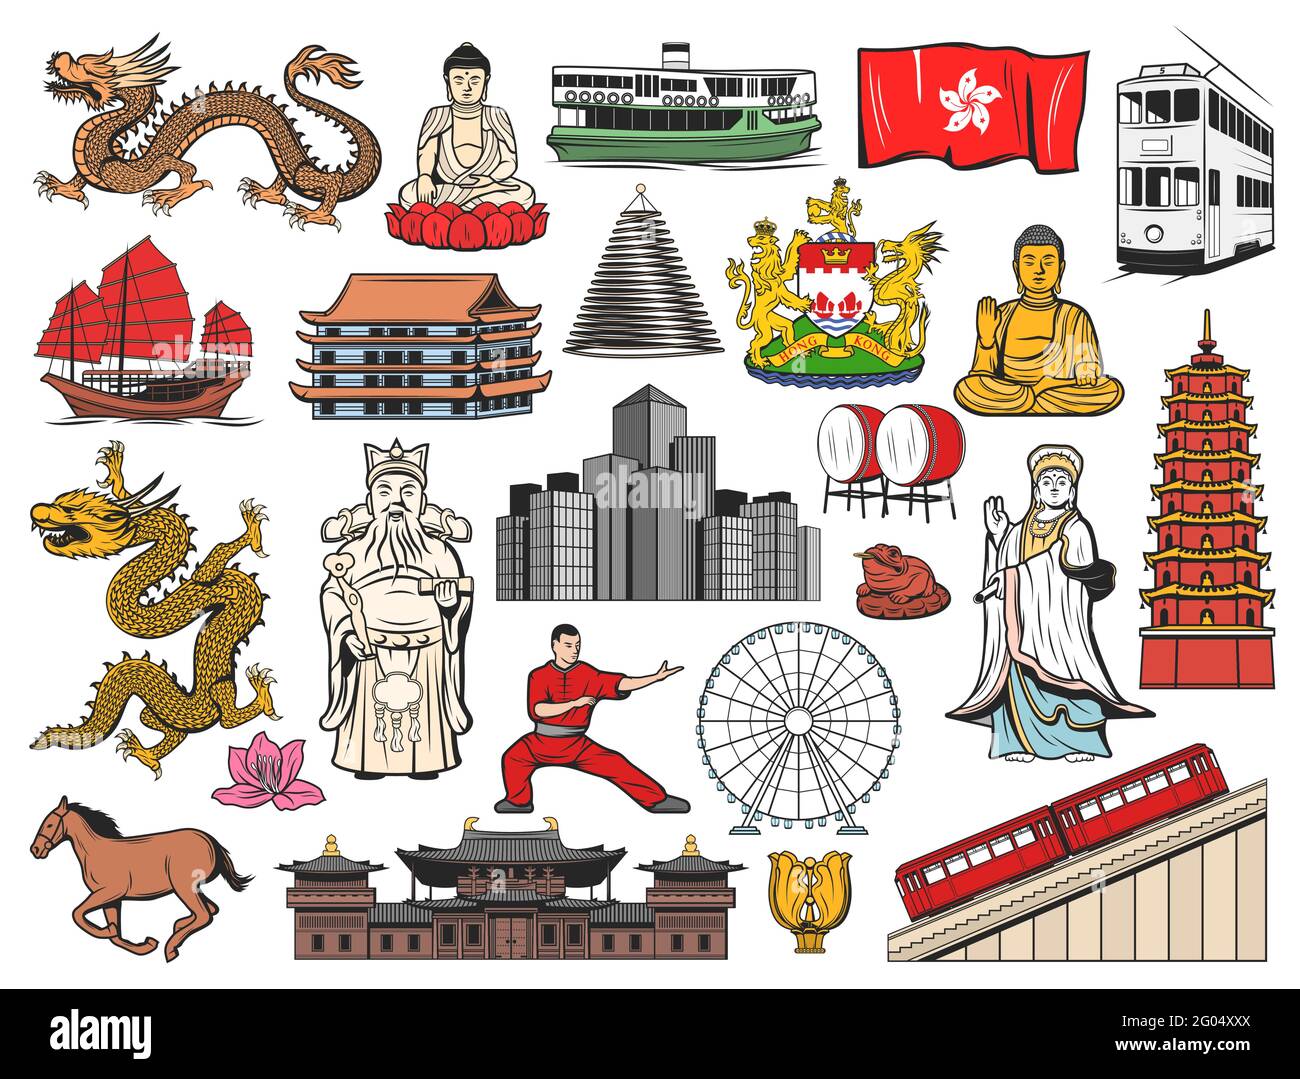 Hong Kong and China travel icons with isolated vector flag, bauhinia flower, Buddha, temple and pagoda buildings. Dragon, peak tram and skyscrapers, c Stock Vector